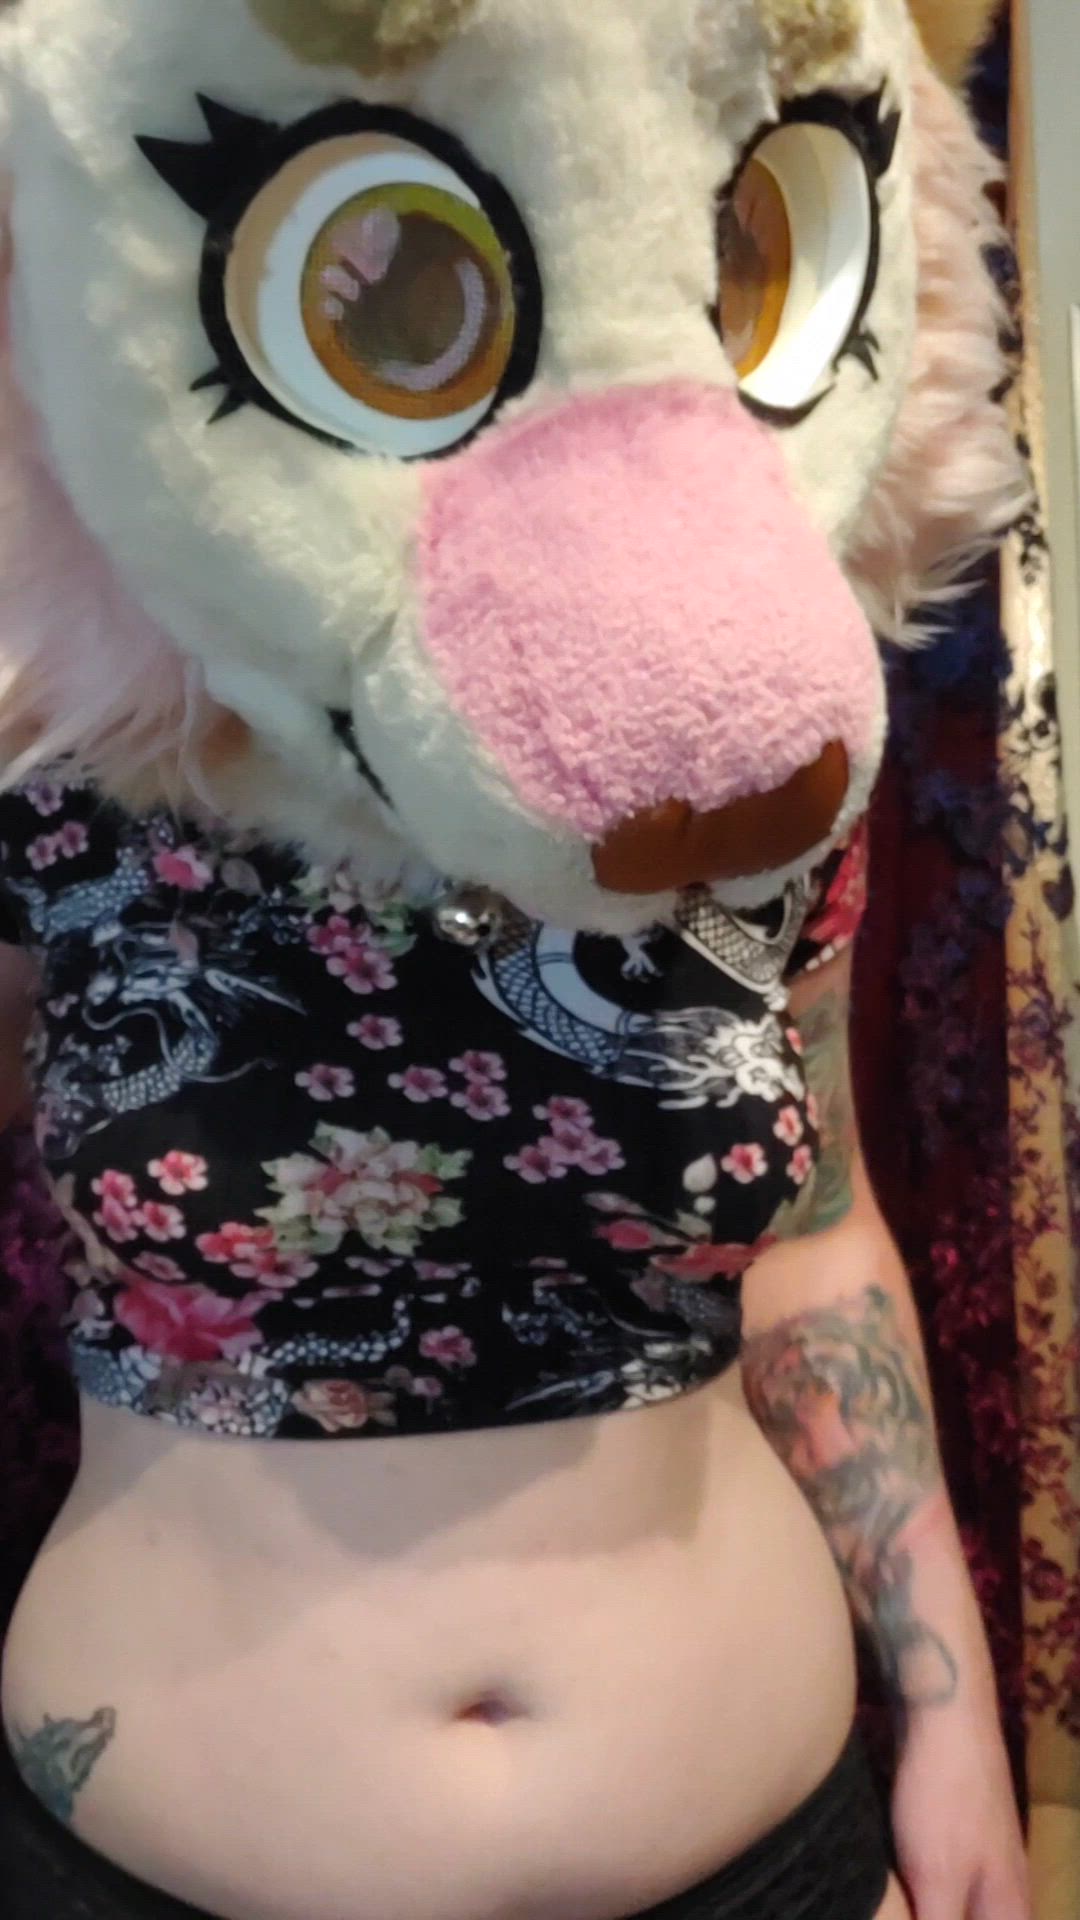 Big Tits porn video with onlyfans model taffycat <strong>@taffycat</strong>